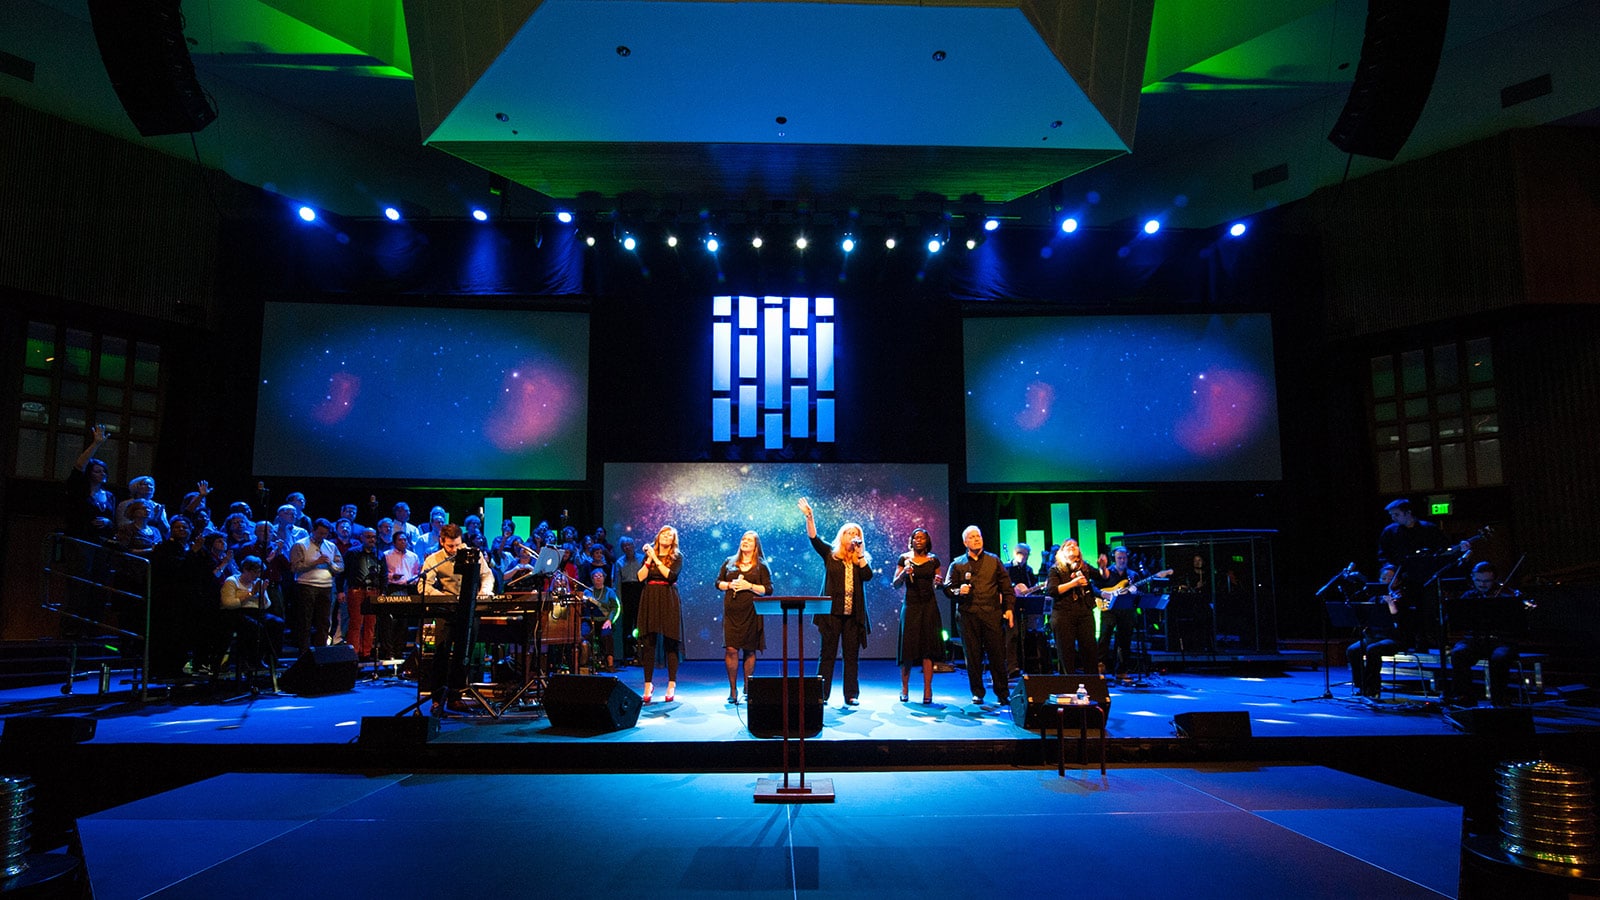 HH ELECTRONIC LINE ARRAY SPEAKERS PACKAGE ( CHURCH, HALL, CONCERT )